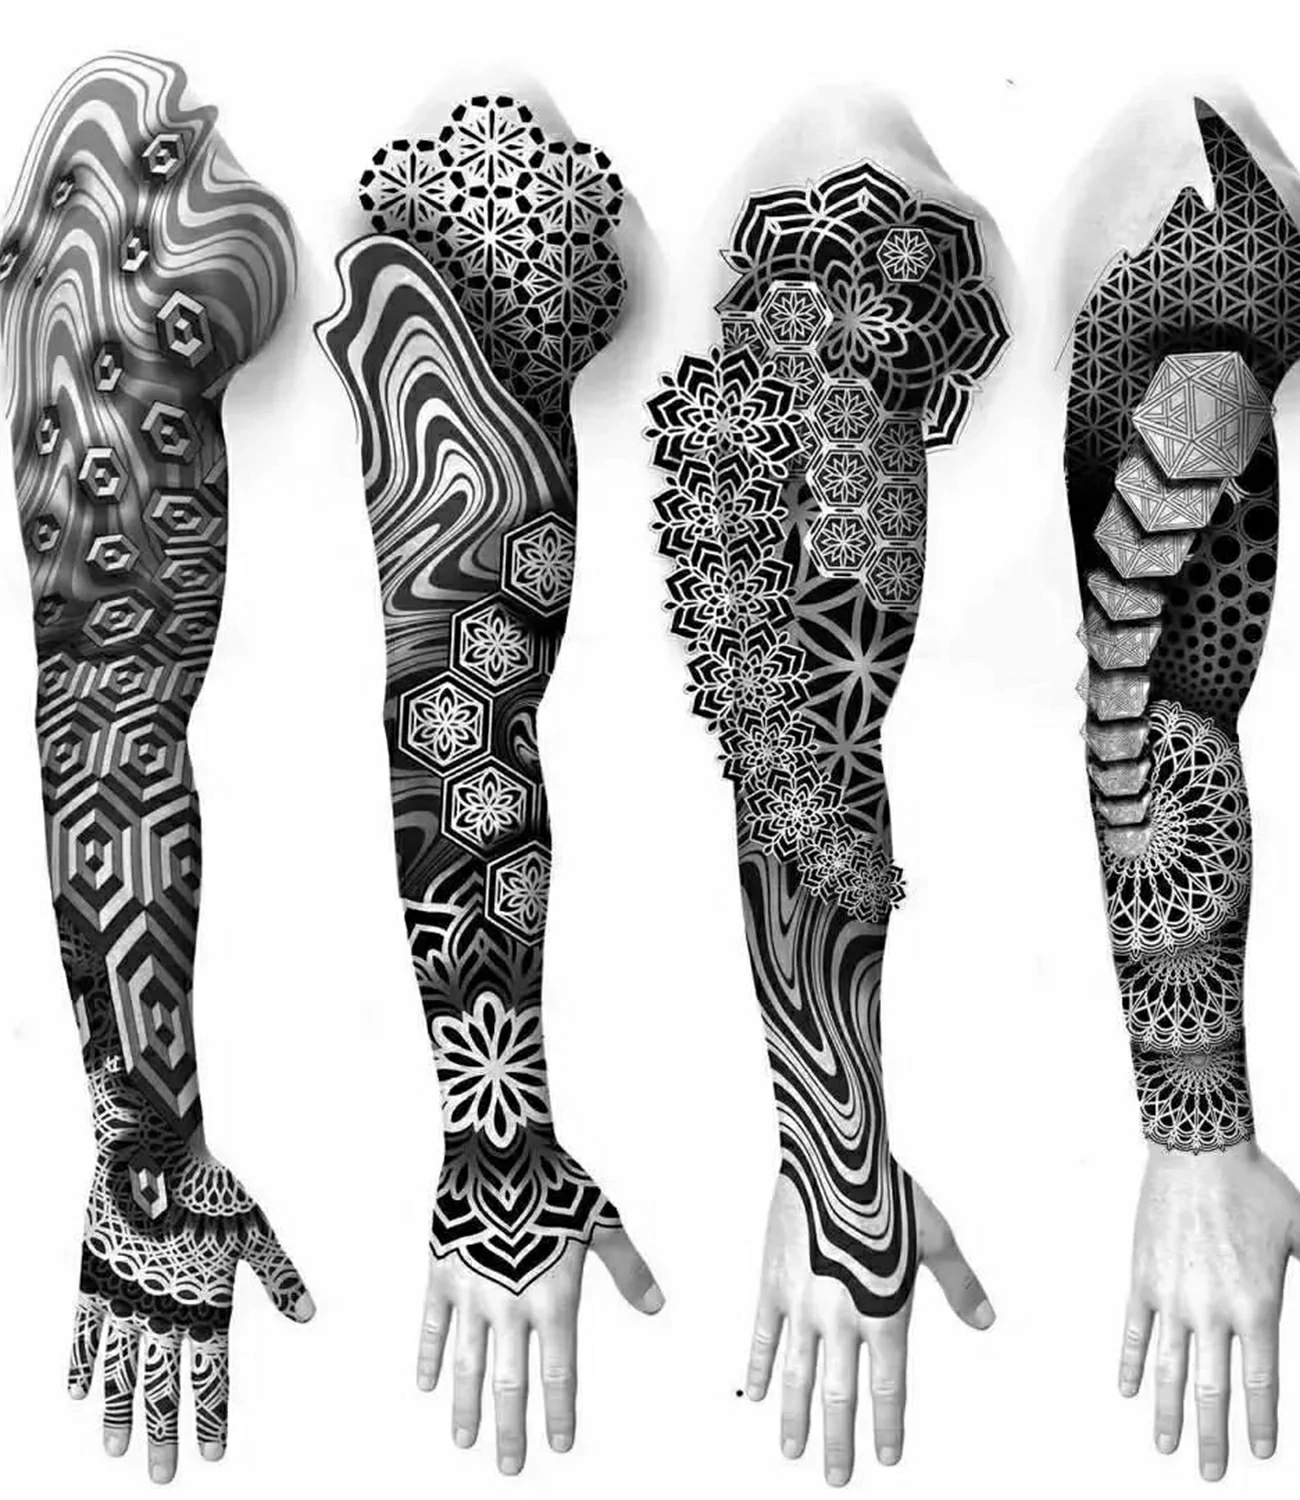 Sleeve Geometric Tattoo Stencil: Sleeve geometric tattoo stencils provide precise outlines for creating interconnected shapes and patterns that cover the entire arm.